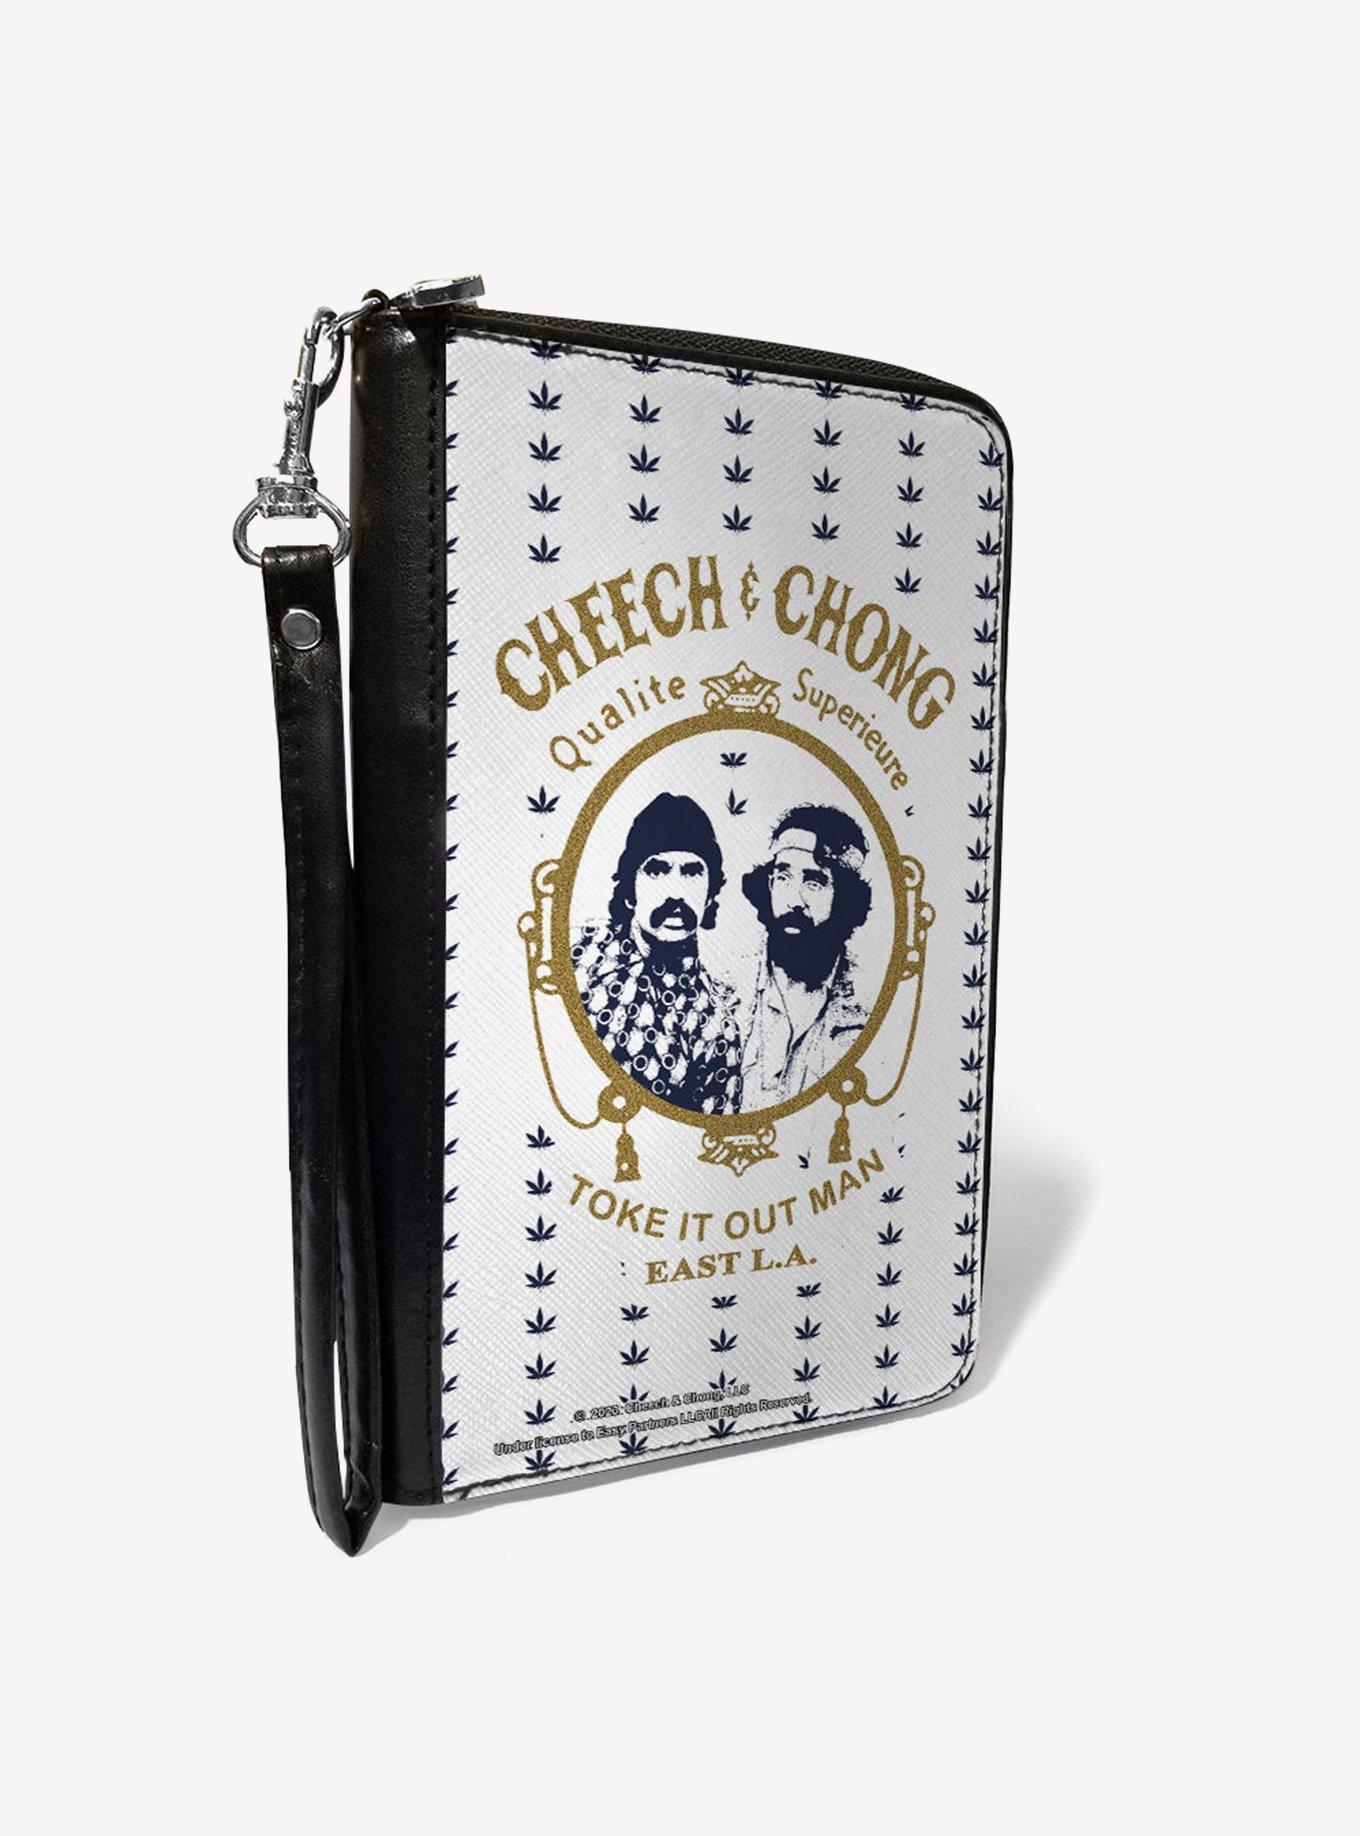 Cheech & Chong Rolling Papers Mirror Pot Leaves Zip Around Wallet